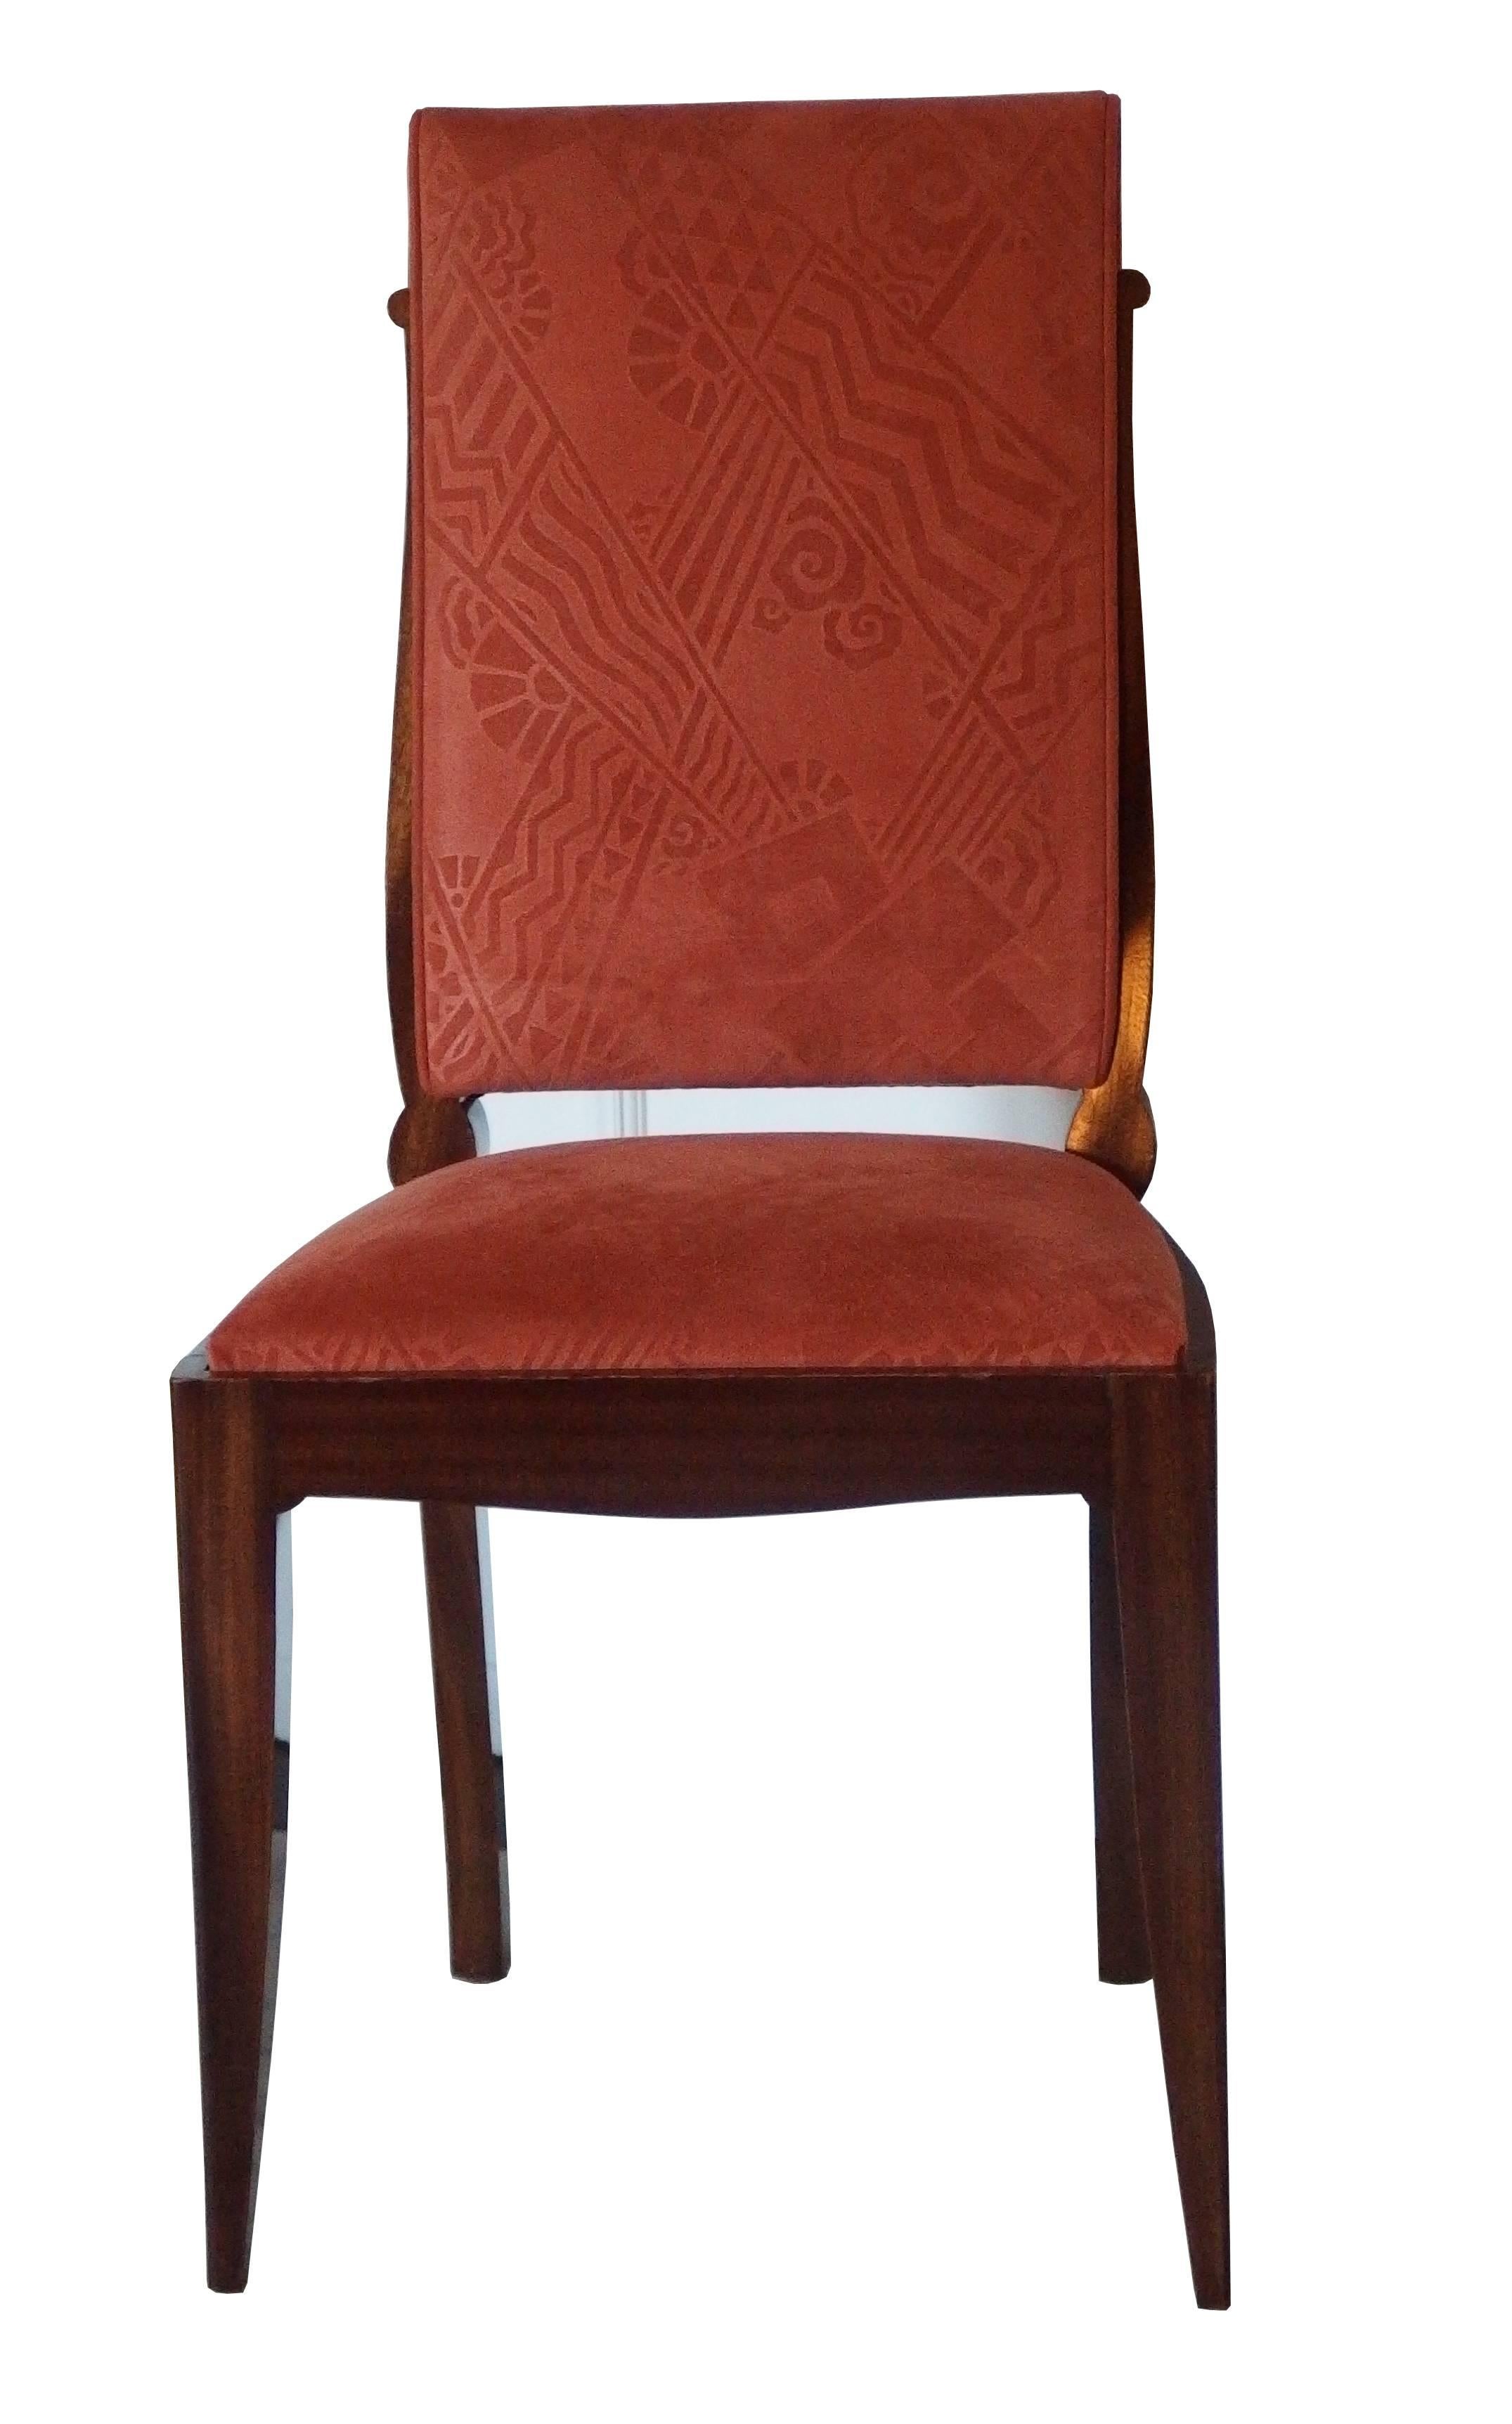 Set of six French mahogany Art Deco dining chairs designed by Gaston Poisson.
The chairs were upholstered in the 1980s with an orange suedine fabric which is in good condition.